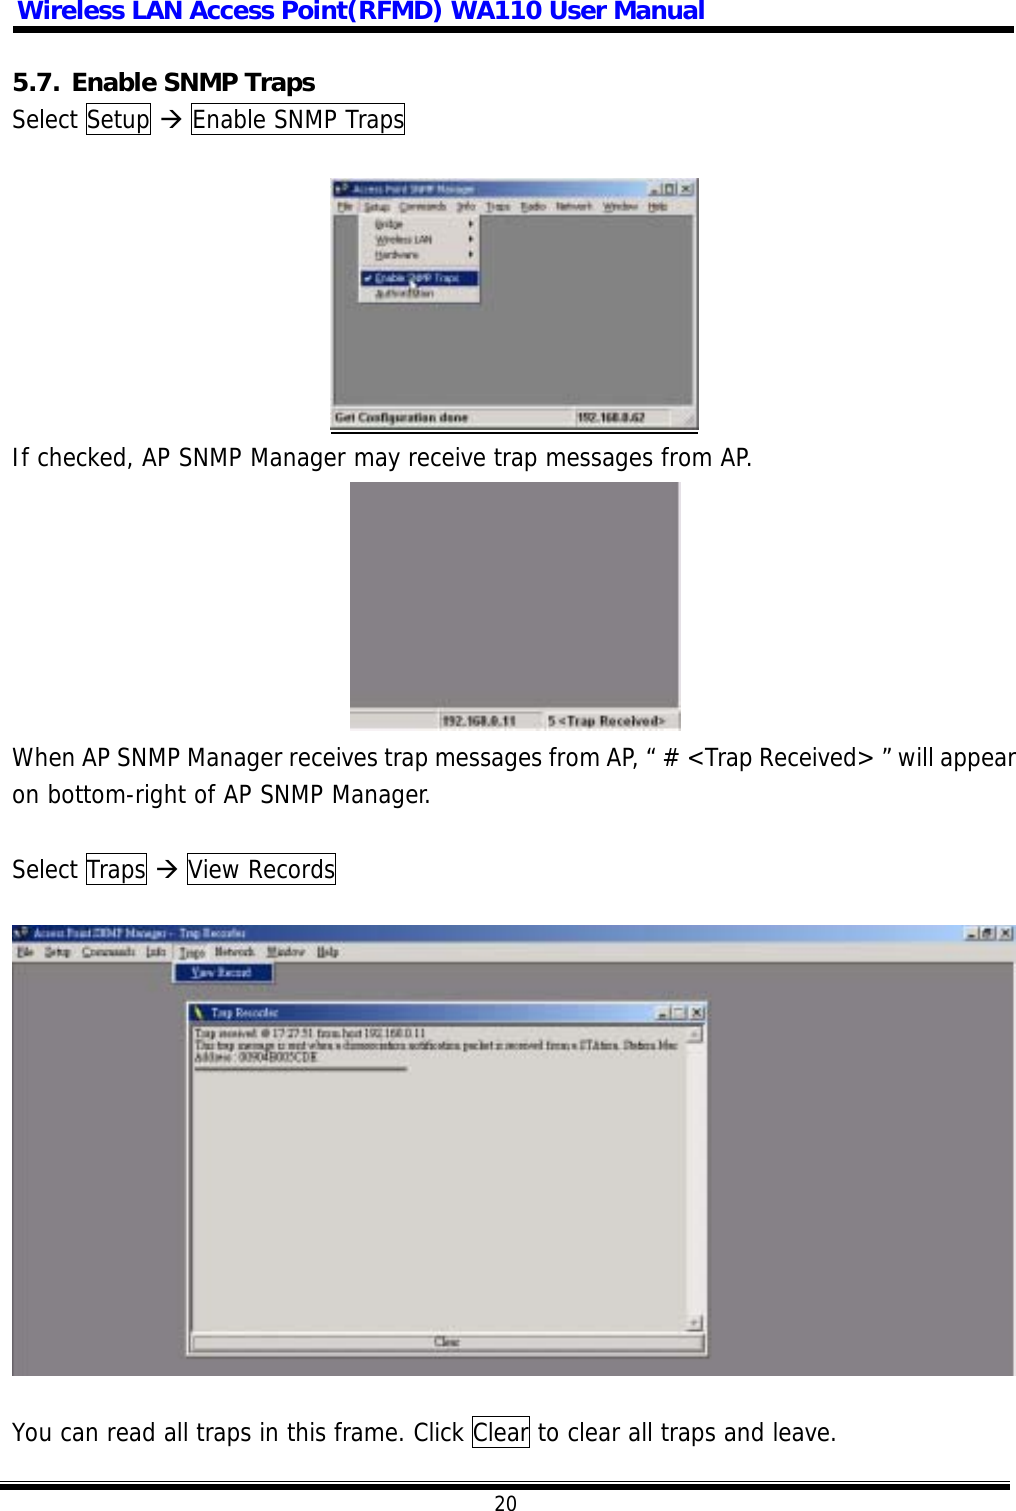 Wireless LAN Access Point(RFMD) WA110 User Manual  20  5.7. Enable SNMP Traps Select Setup  Enable SNMP Traps    If checked, AP SNMP Manager may receive trap messages from AP.  When AP SNMP Manager receives trap messages from AP, “ # &lt;Trap Received&gt; ” will appear on bottom-right of AP SNMP Manager.  Select Traps  View Records    You can read all traps in this frame. Click Clear to clear all traps and leave.   